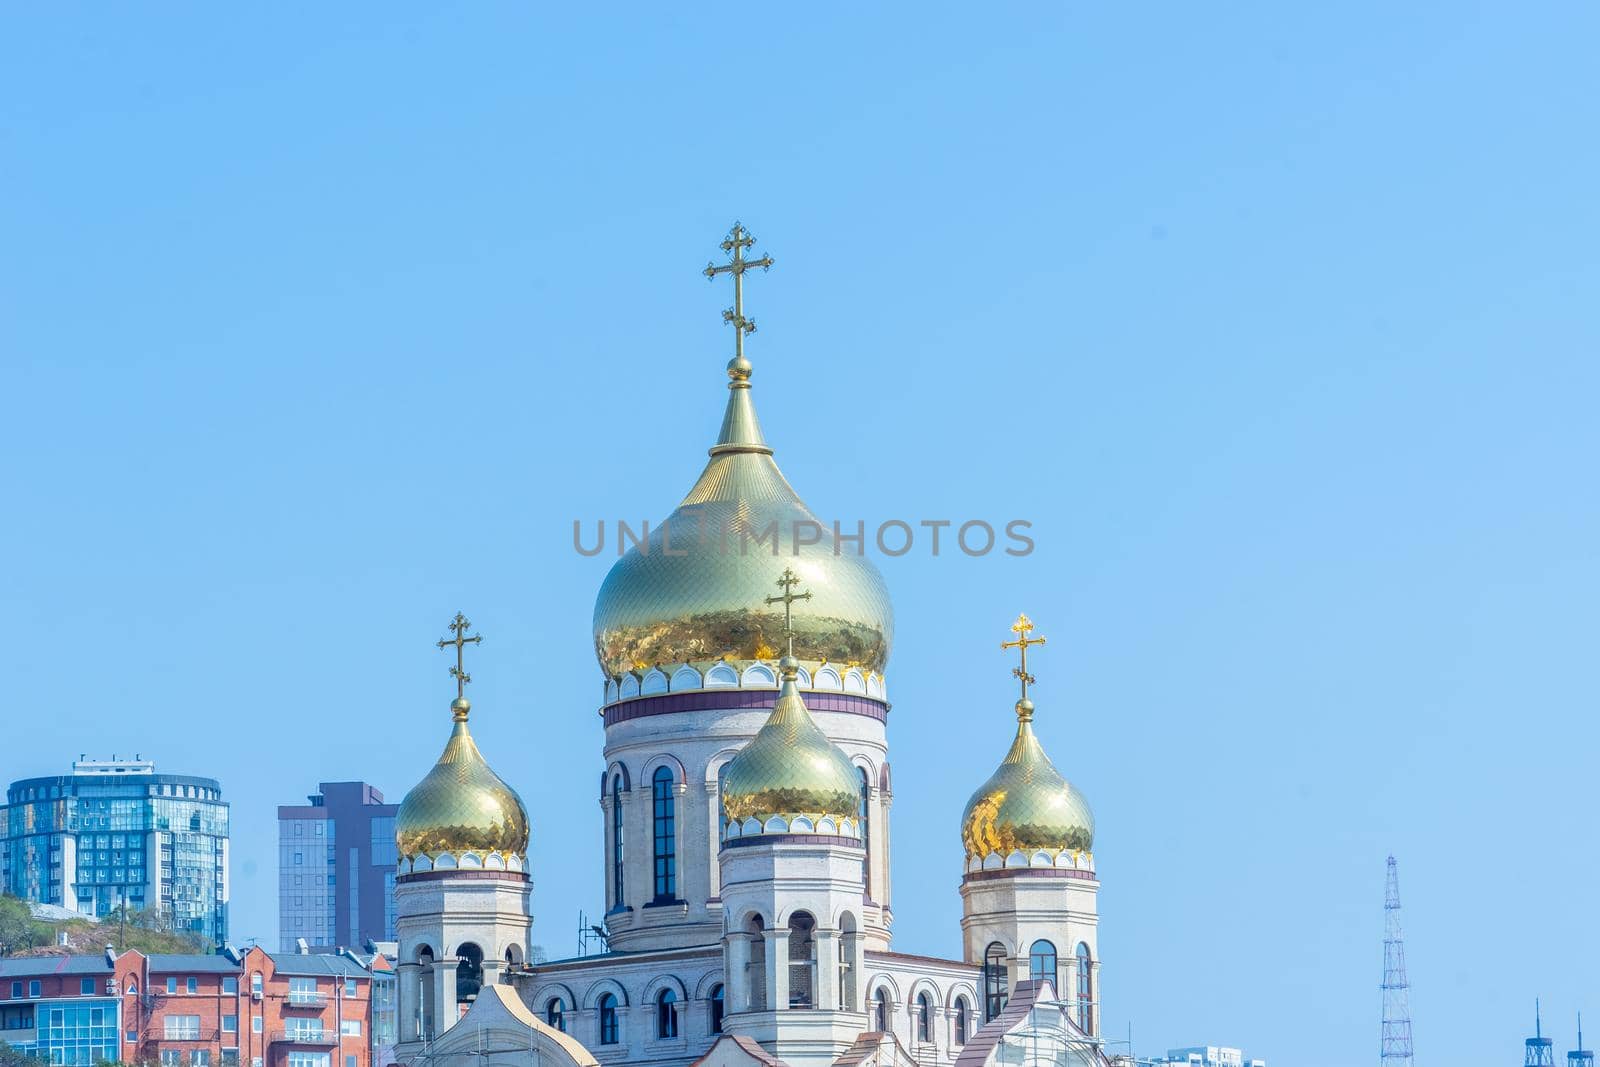 Vladivostok, Russia. Urban landscape with a view of the Golden domes of the temple